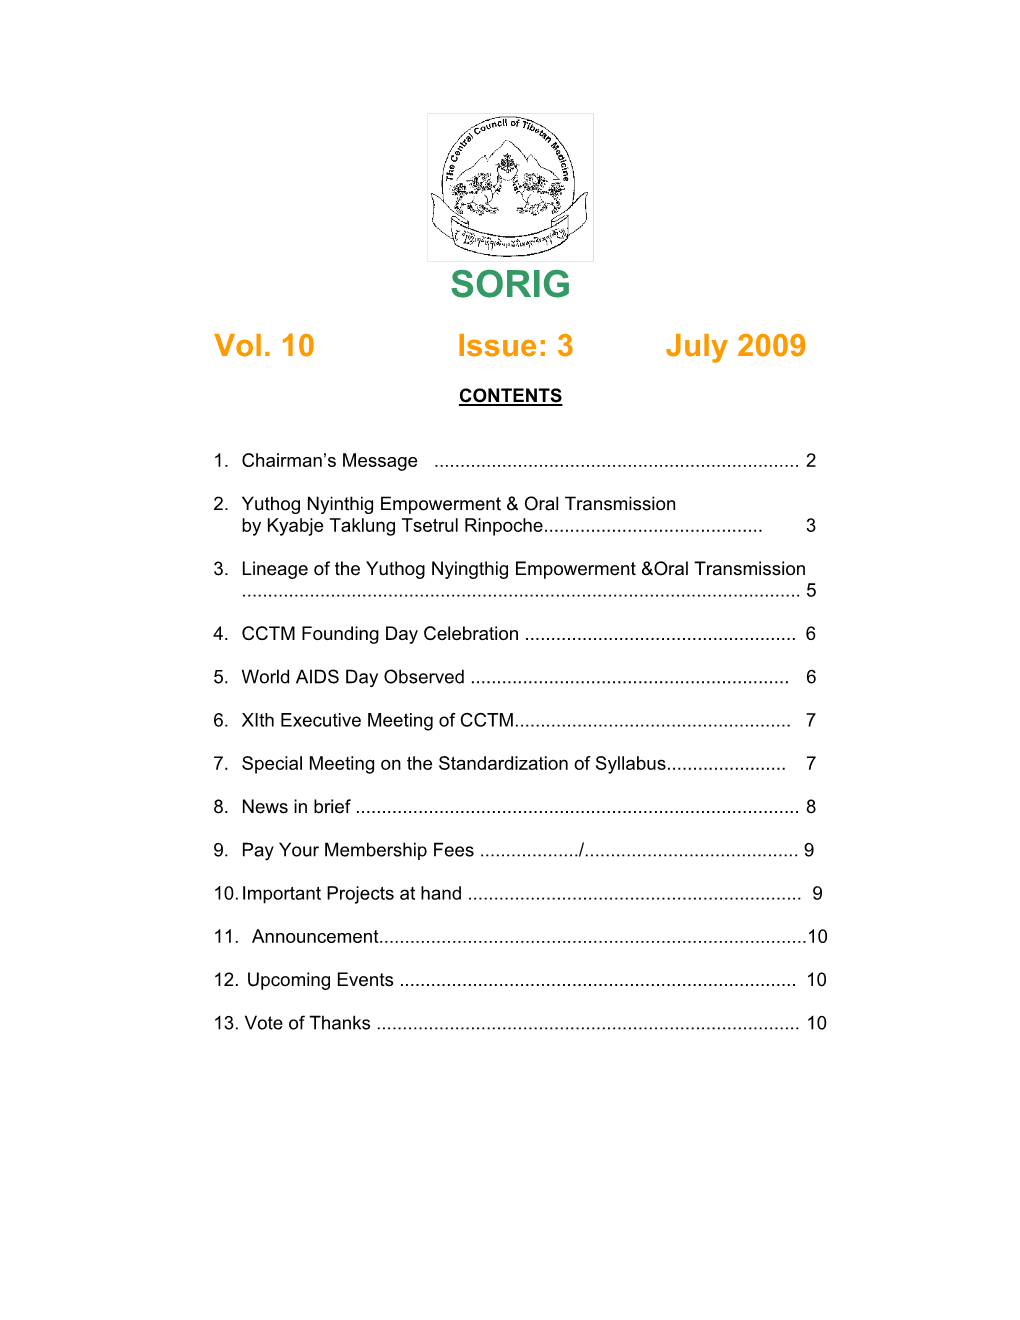 Vol. 10 Issue: 3 July 2009